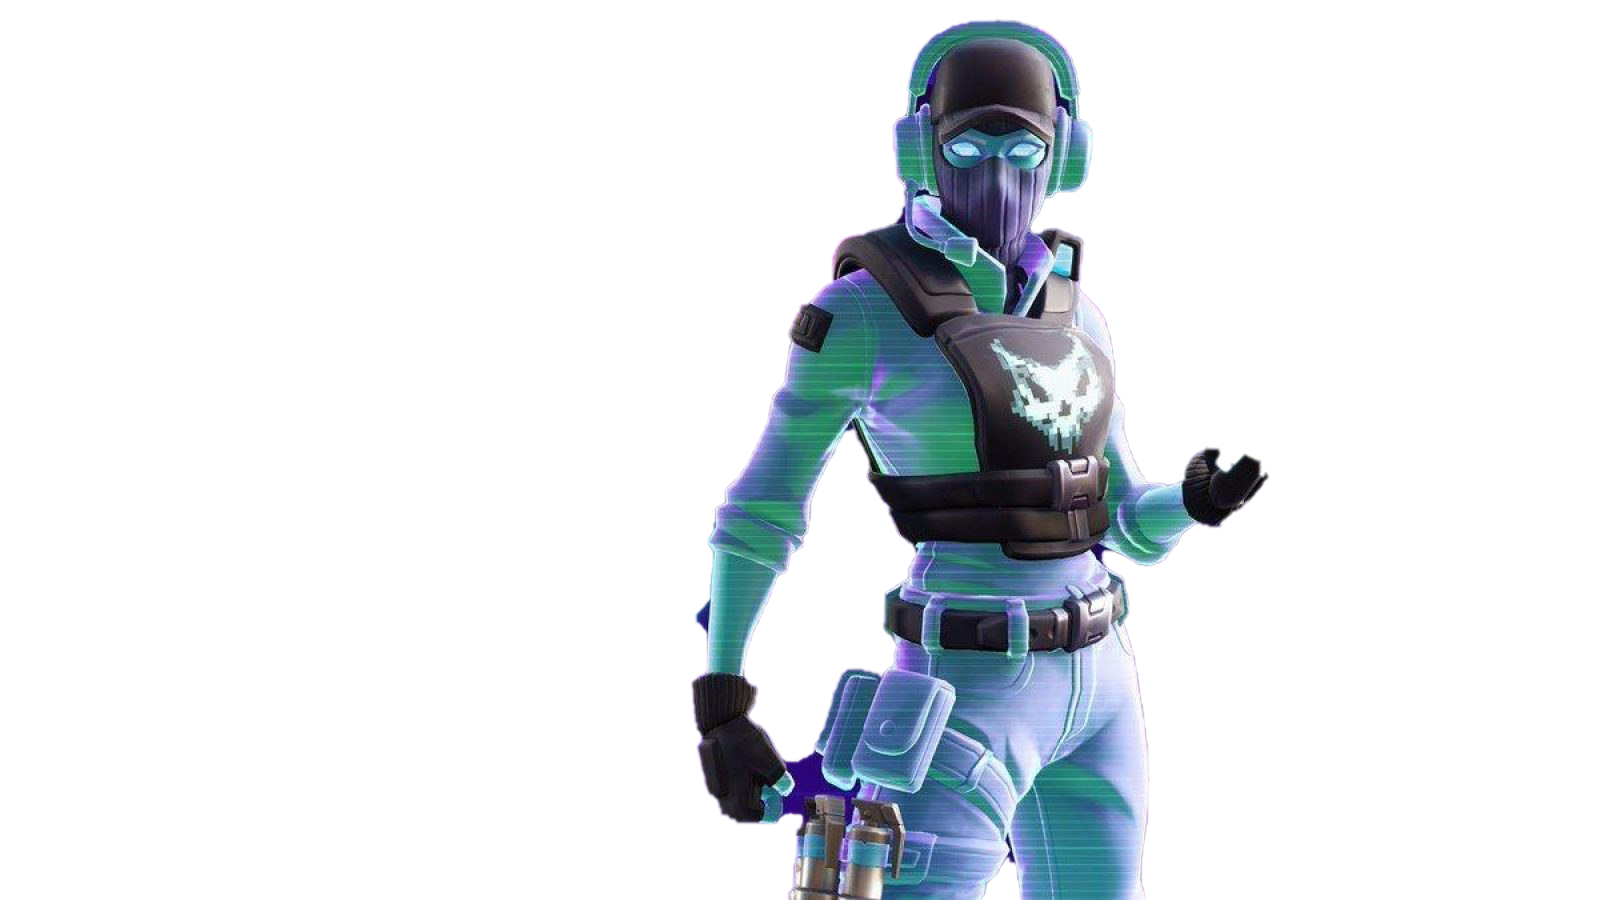 Download PNG image - Fornite Breakpoint PNG Image 